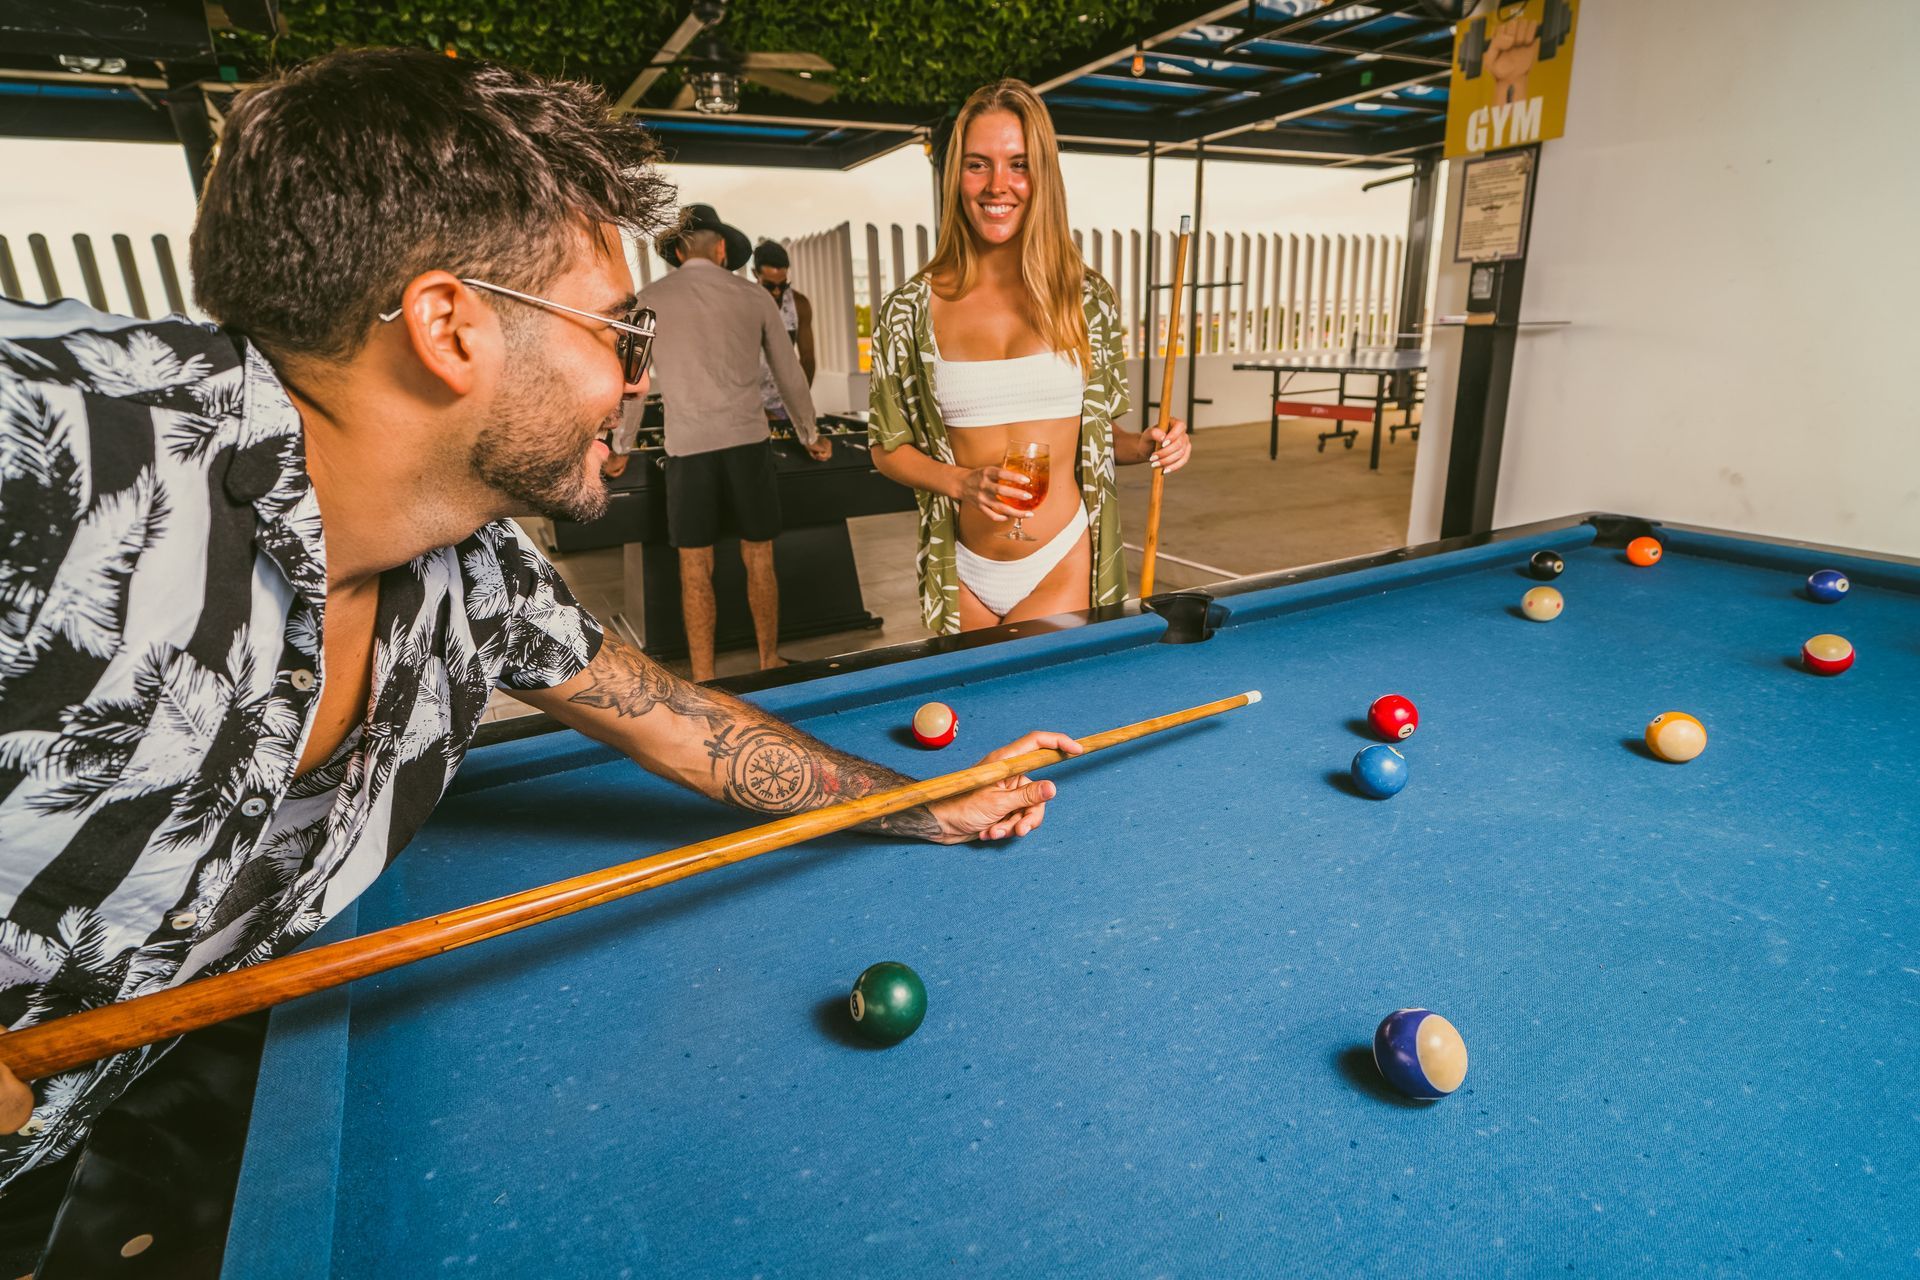 A man and a woman are playing pool on a pool table things to do in cancun at nomads.